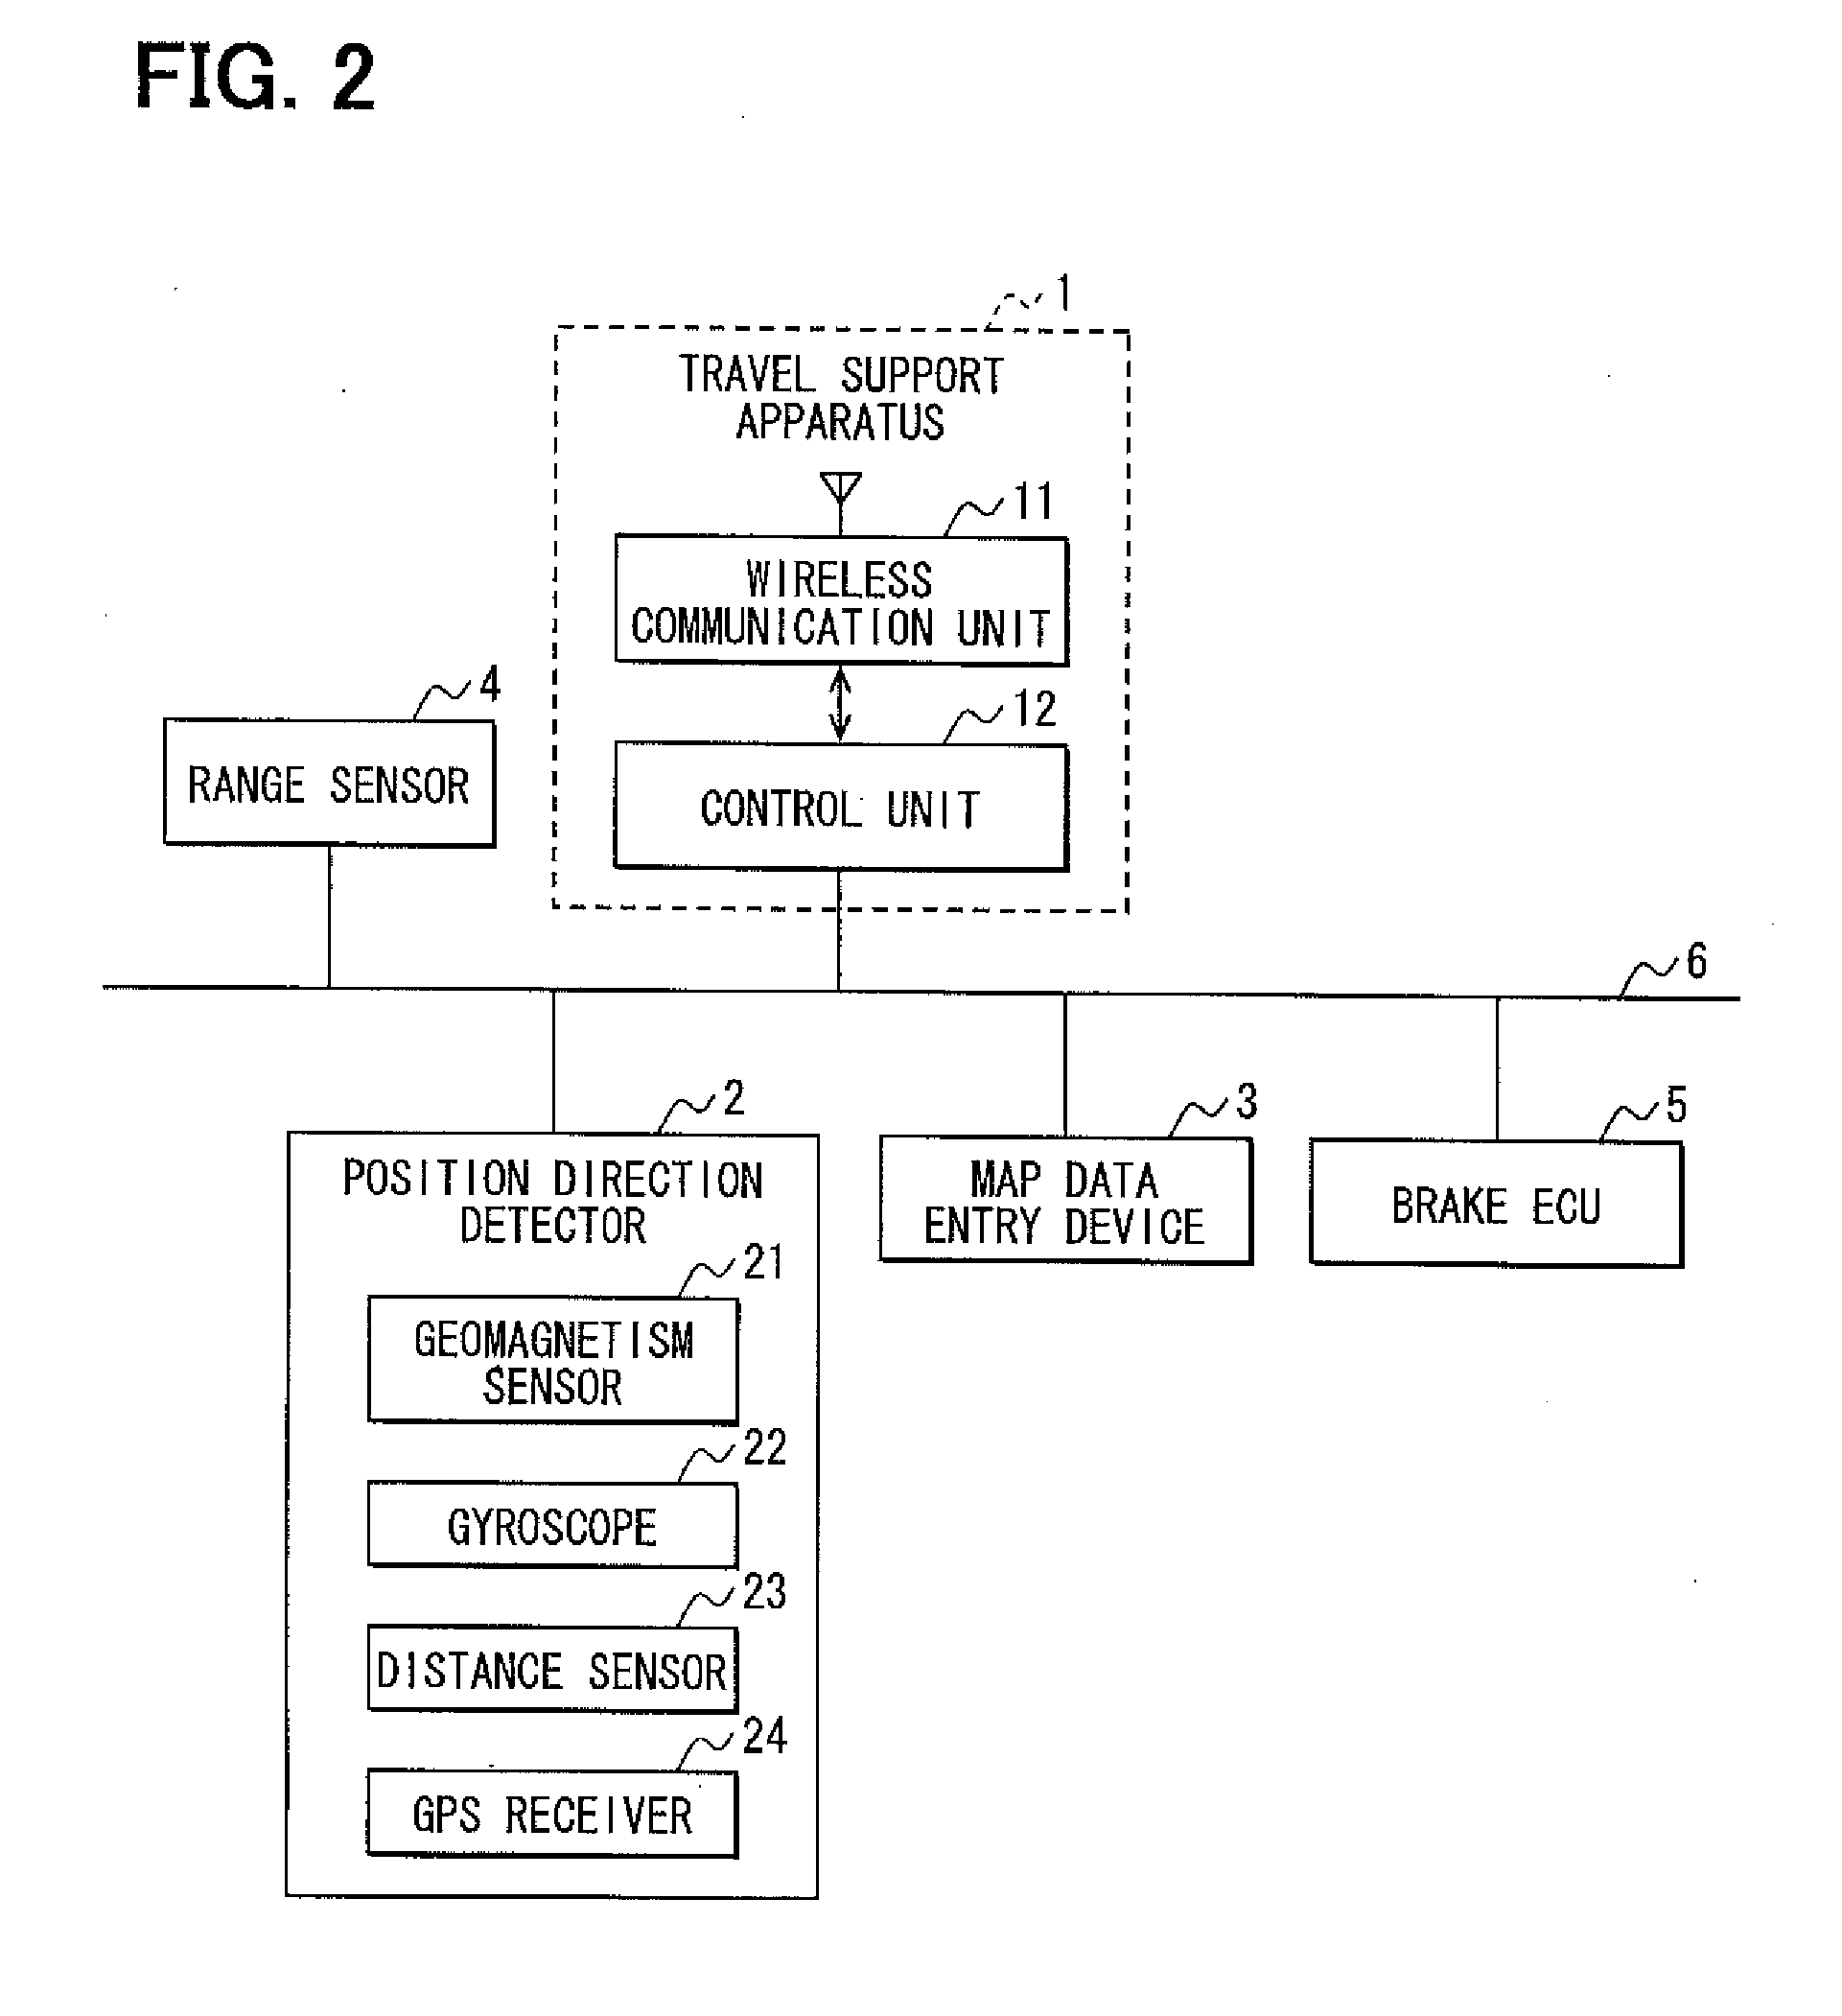 Travel support apparatus and travel support system